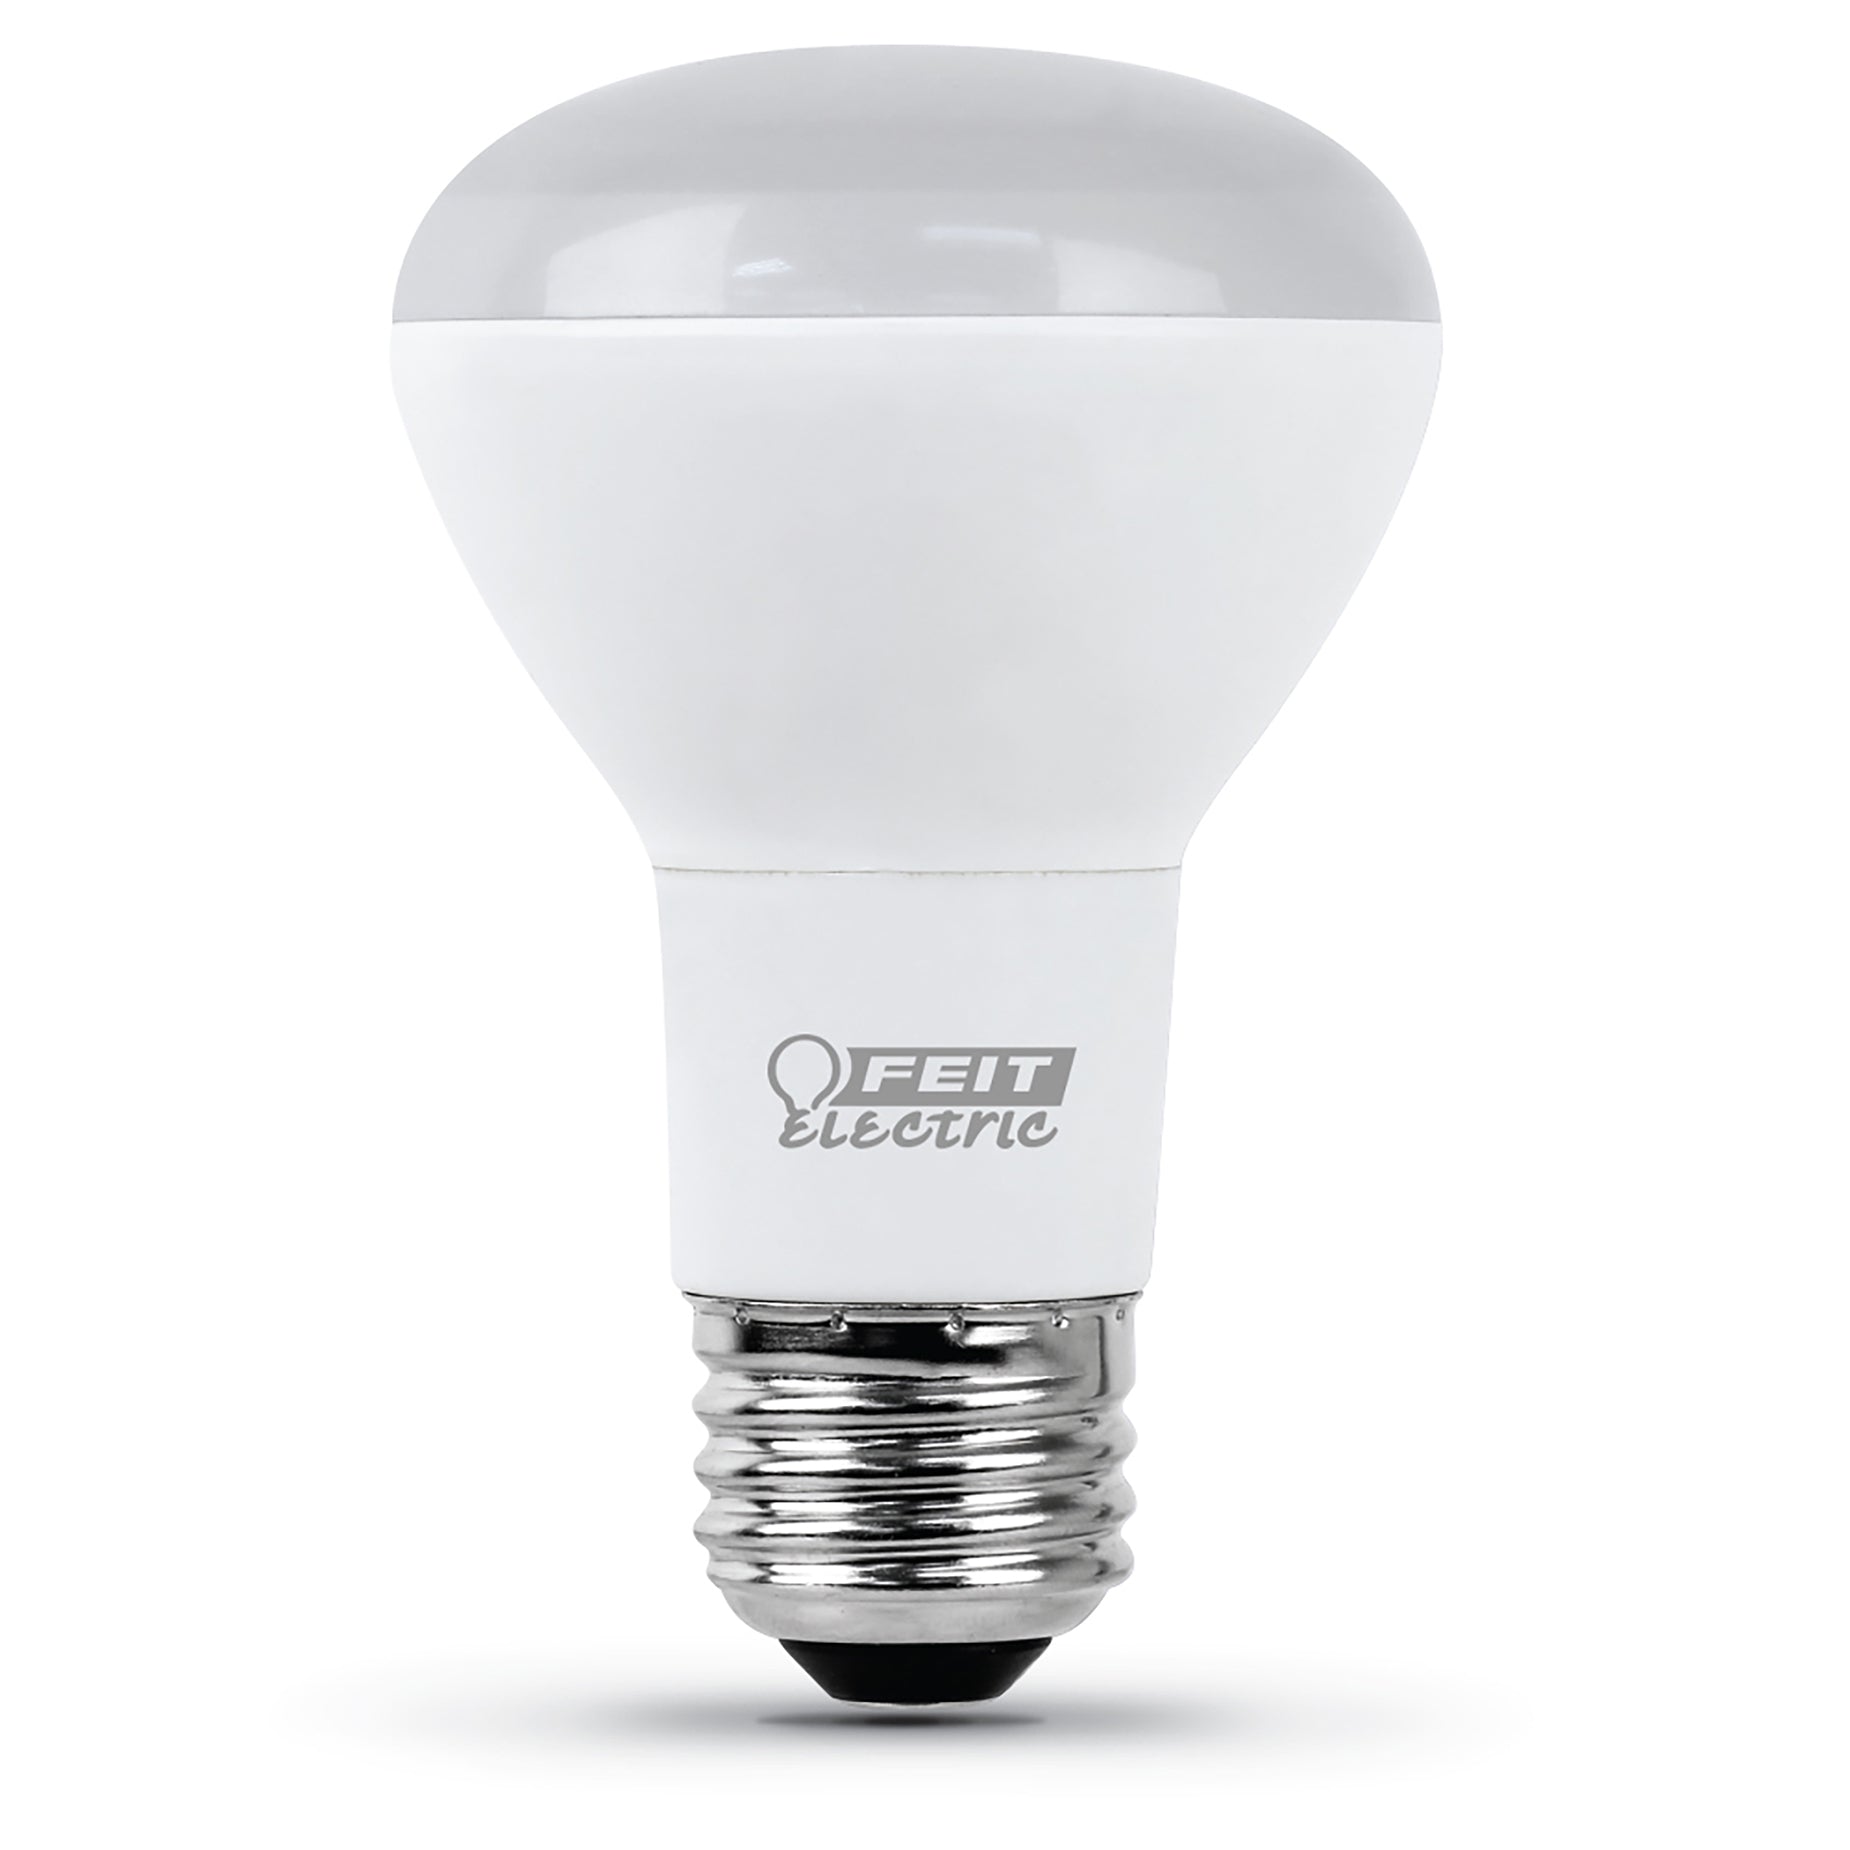 R20 LED Light Bulb, 5 Watts, E26, Dimmable Reflector, 450 lumens, Soft White, Track & Recessed Lighting